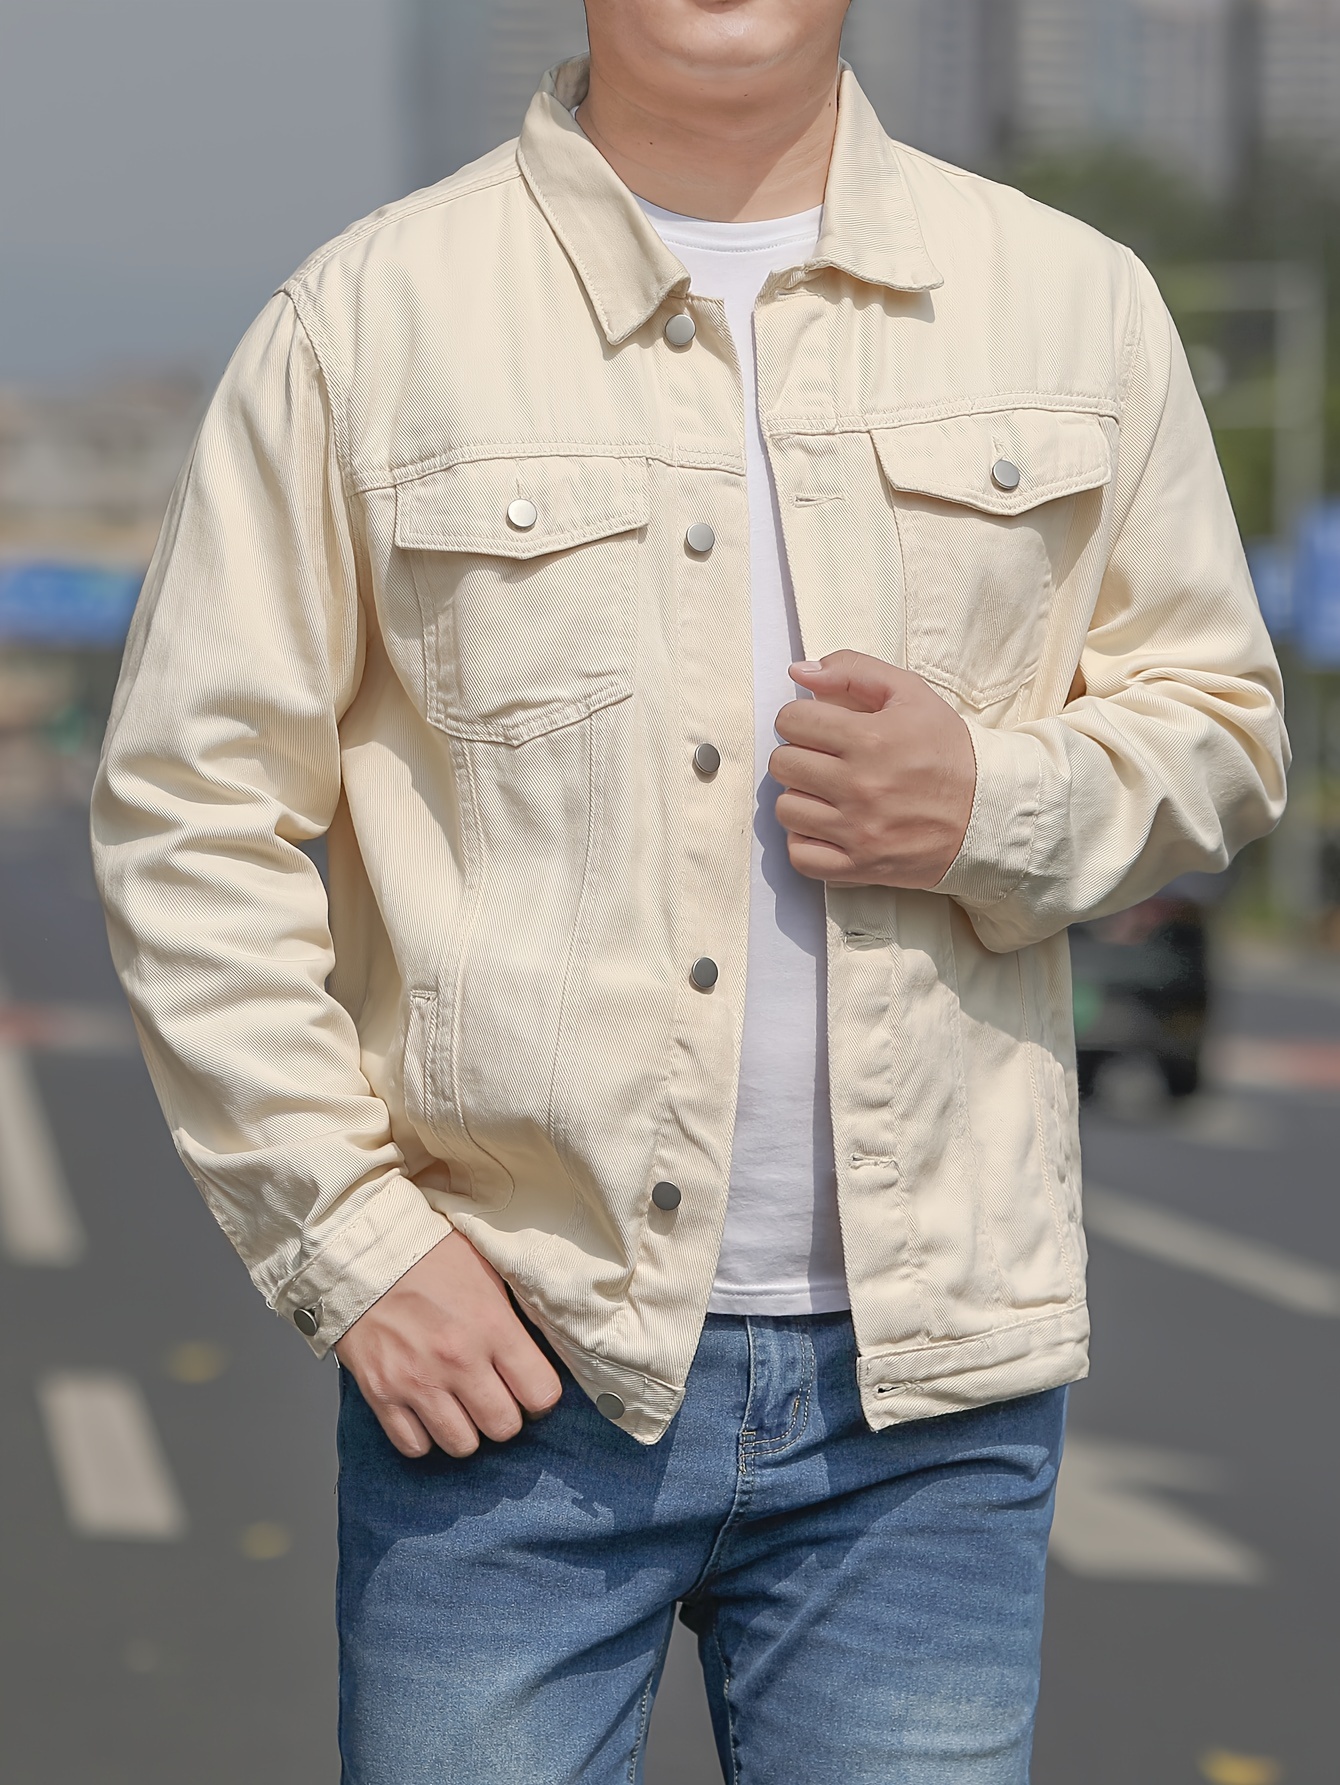 Plus Size Men's Cotton Jacket Fashion Casual Denim Jacket With Pockets For  Fall Winter, Men's Clothing